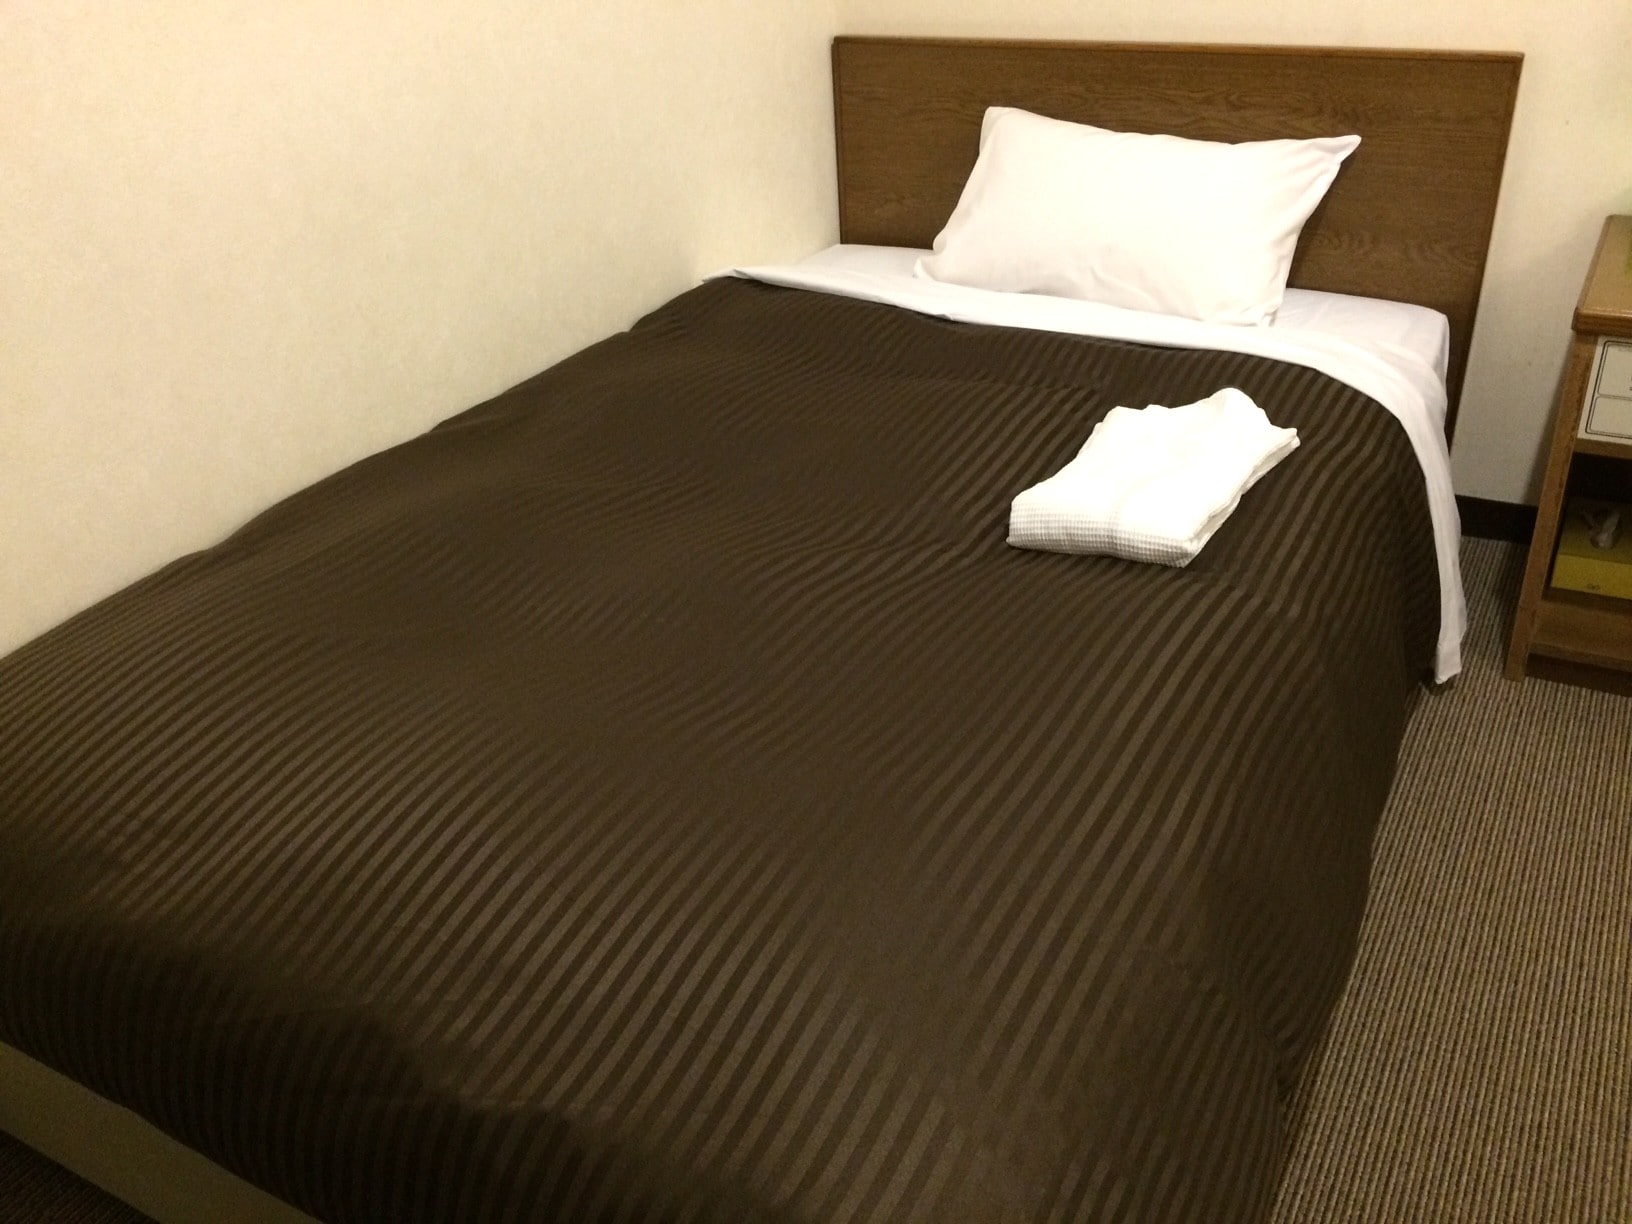 It is a single room. Have a good night's sleep with a calm brown futon!